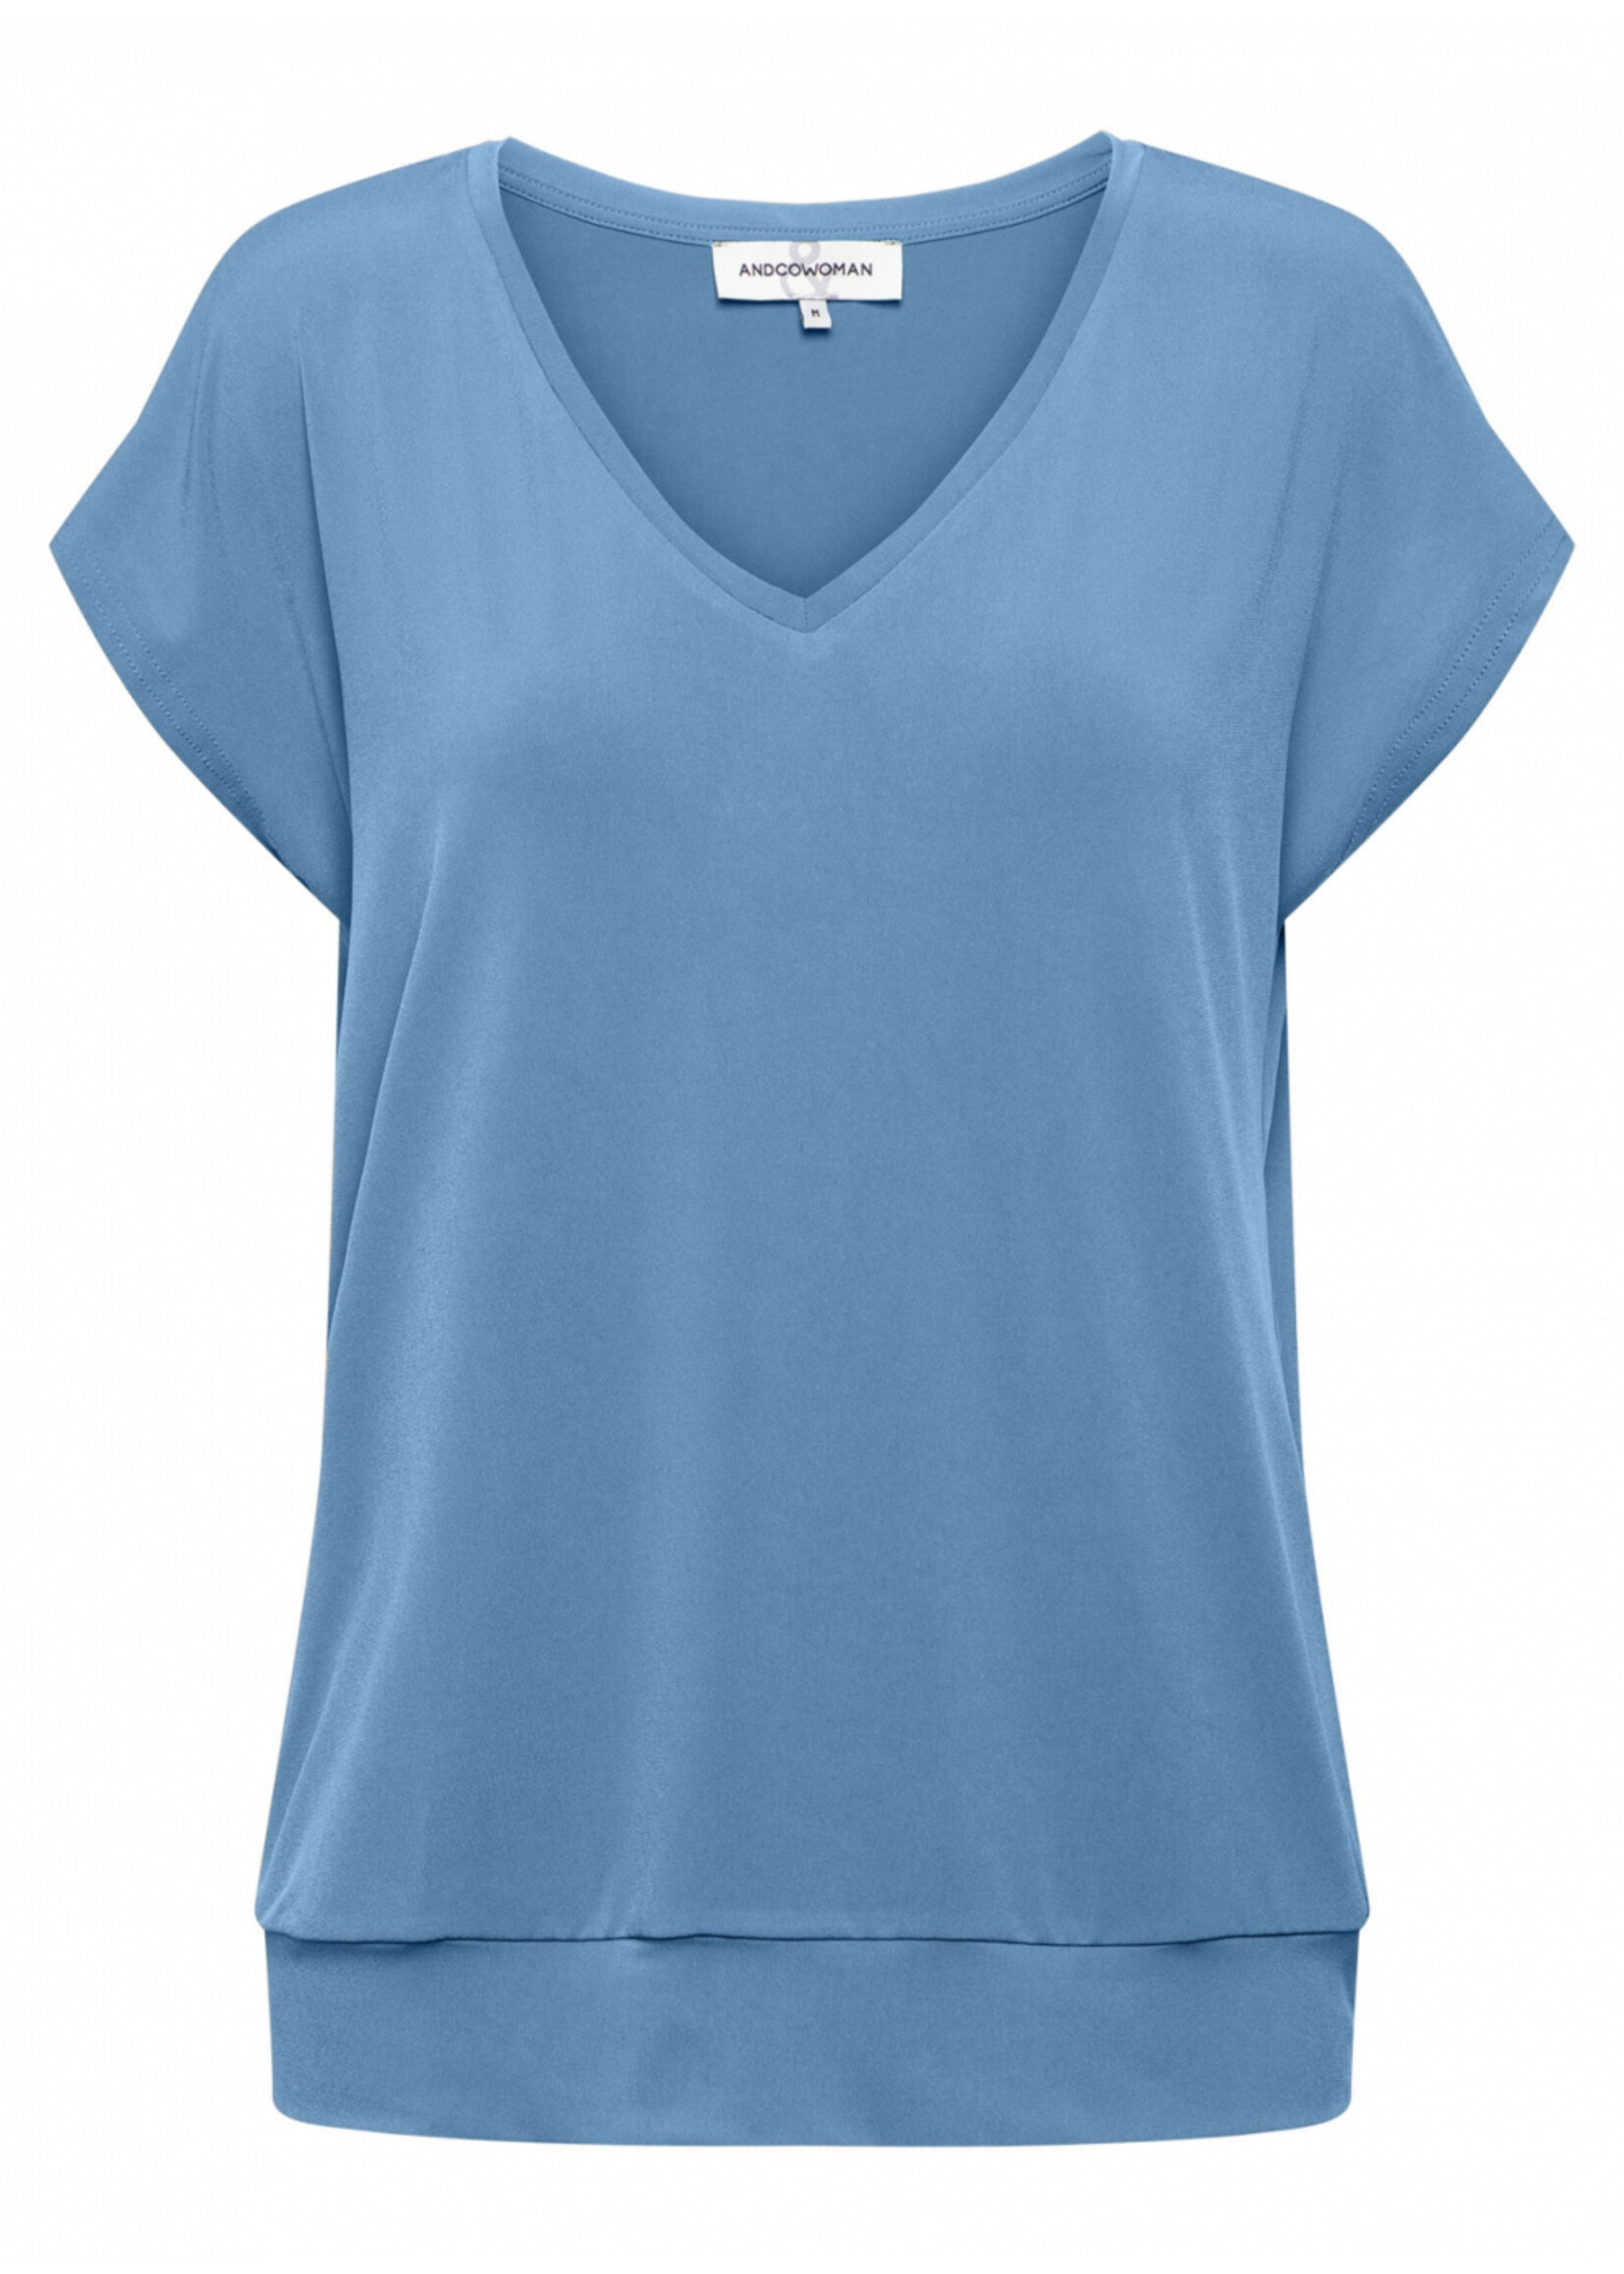 &Co woman Top lucia light denim to190